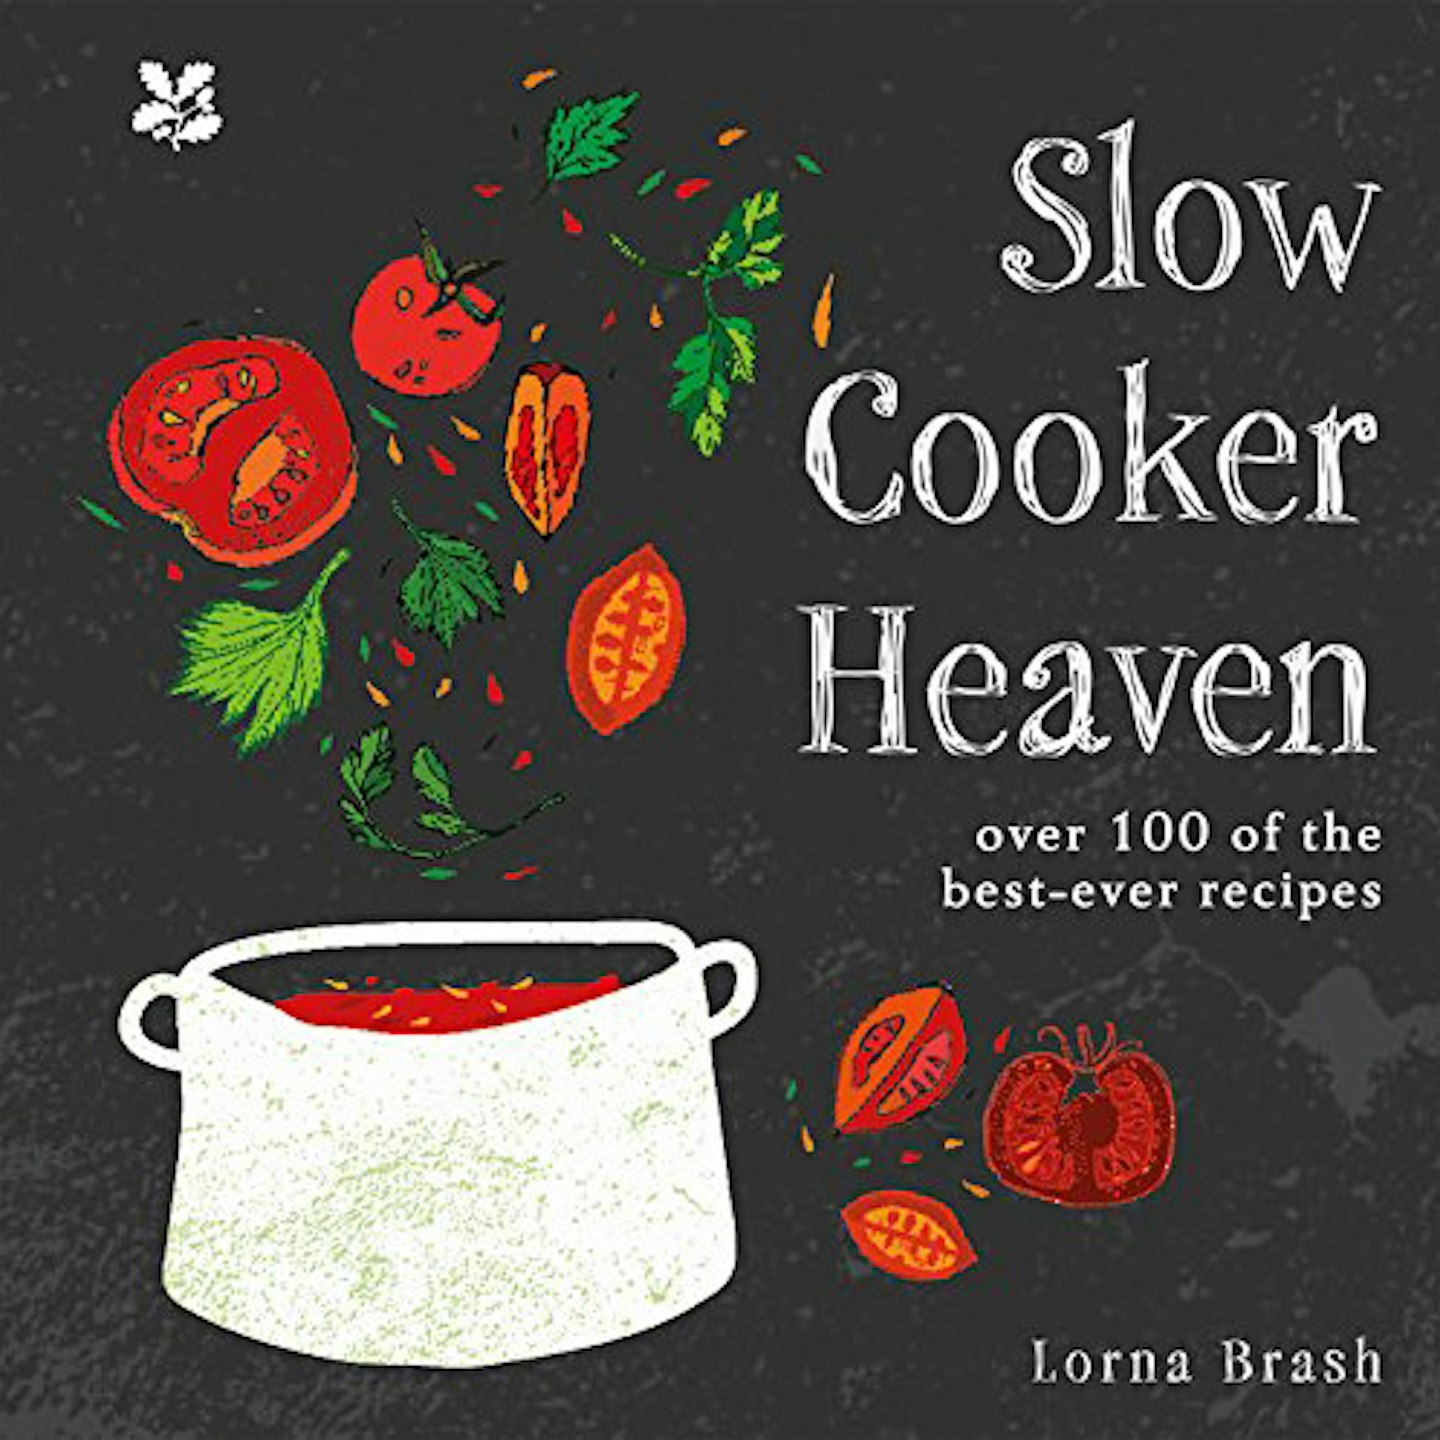 Slow Cooker Heaven: Over 100 of the Best-Ever Recipes by Lorna Brash